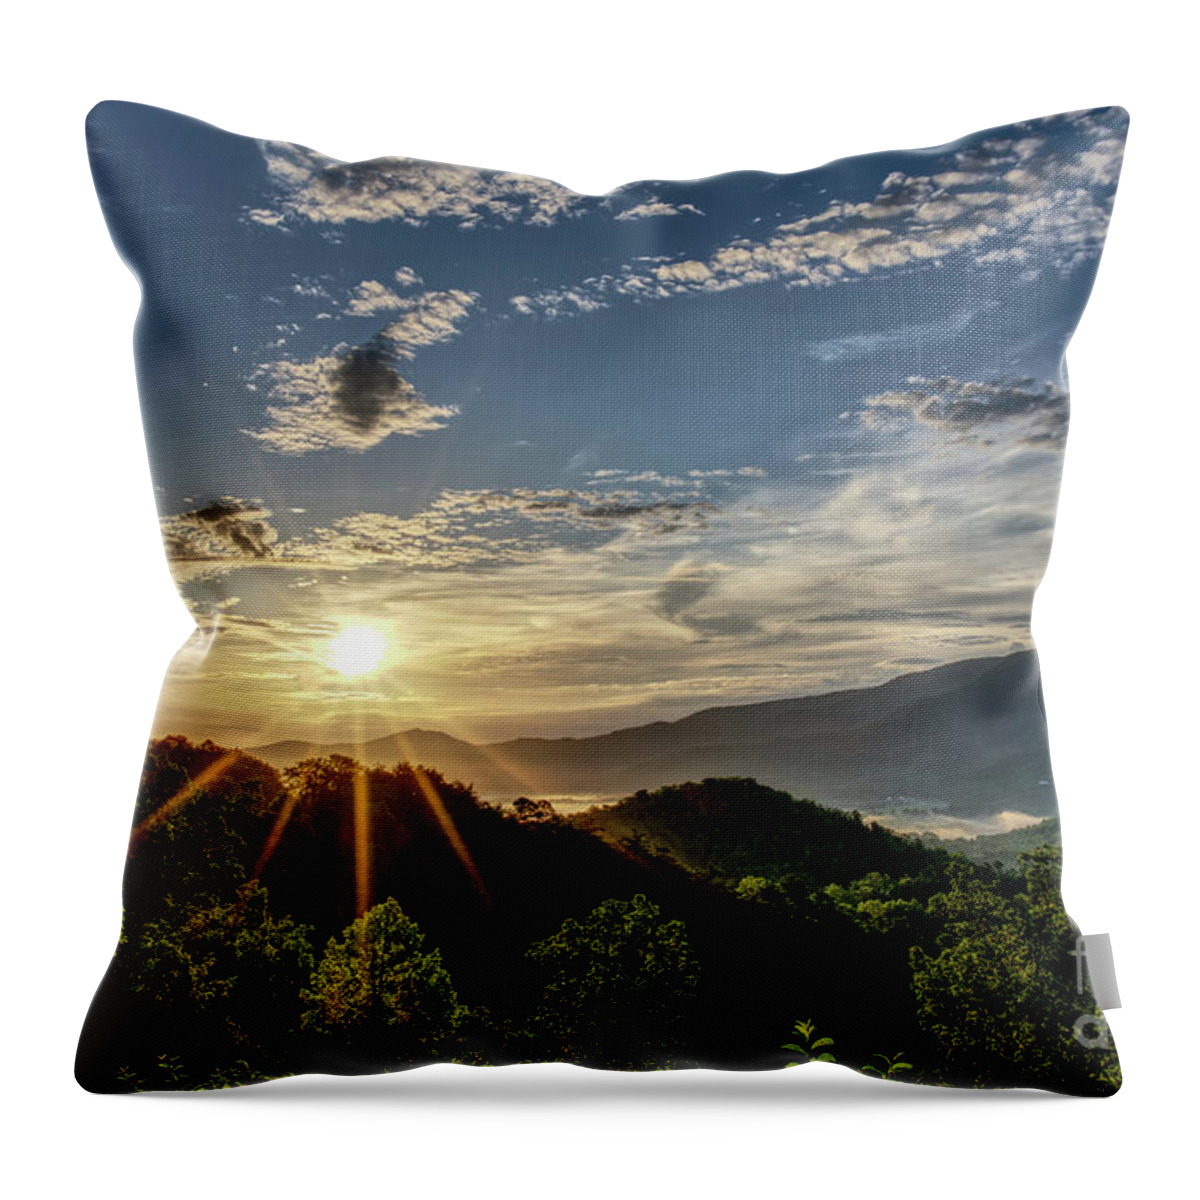 Smoky Mountains Throw Pillow featuring the photograph Smoky Mountain Sunrise 4 by Phil Perkins